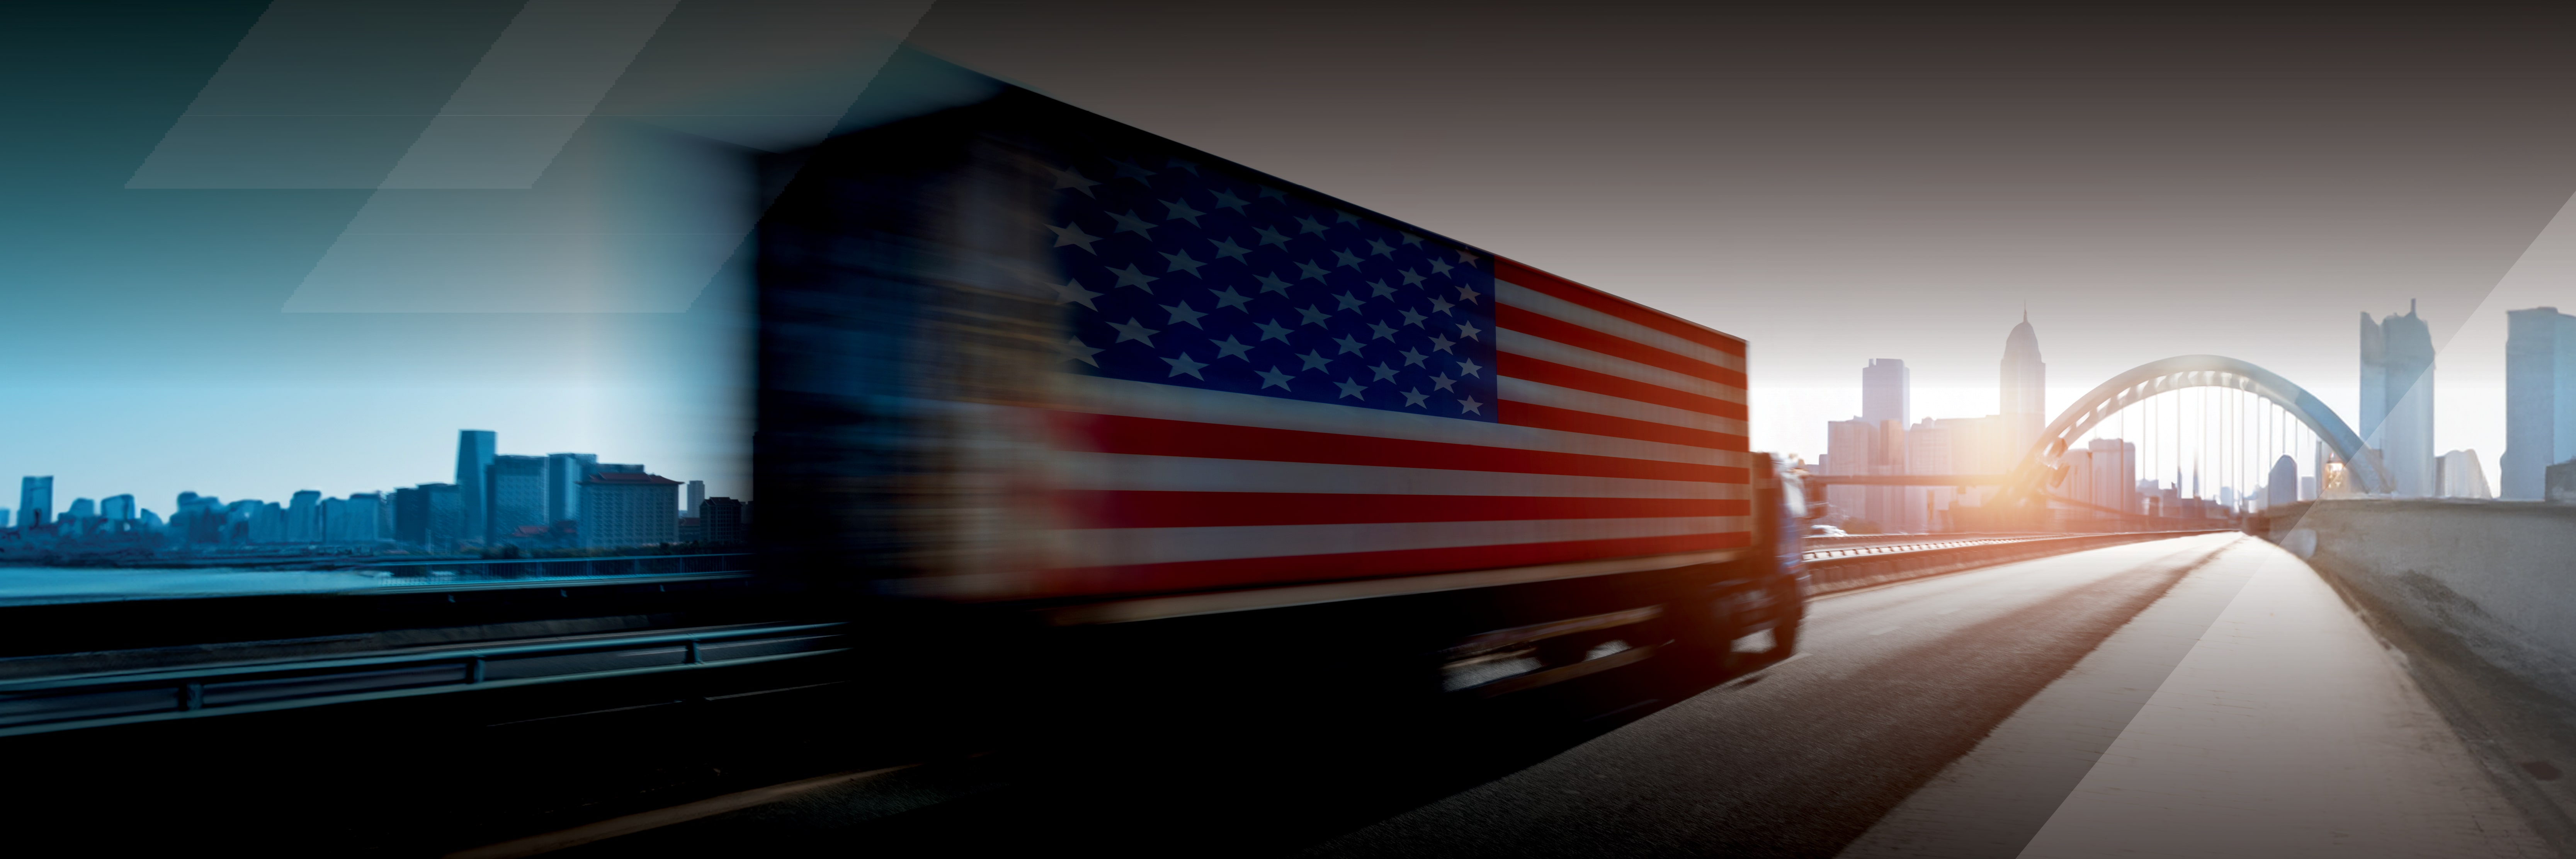 Semi truck with American flag on its trailer driving down highway